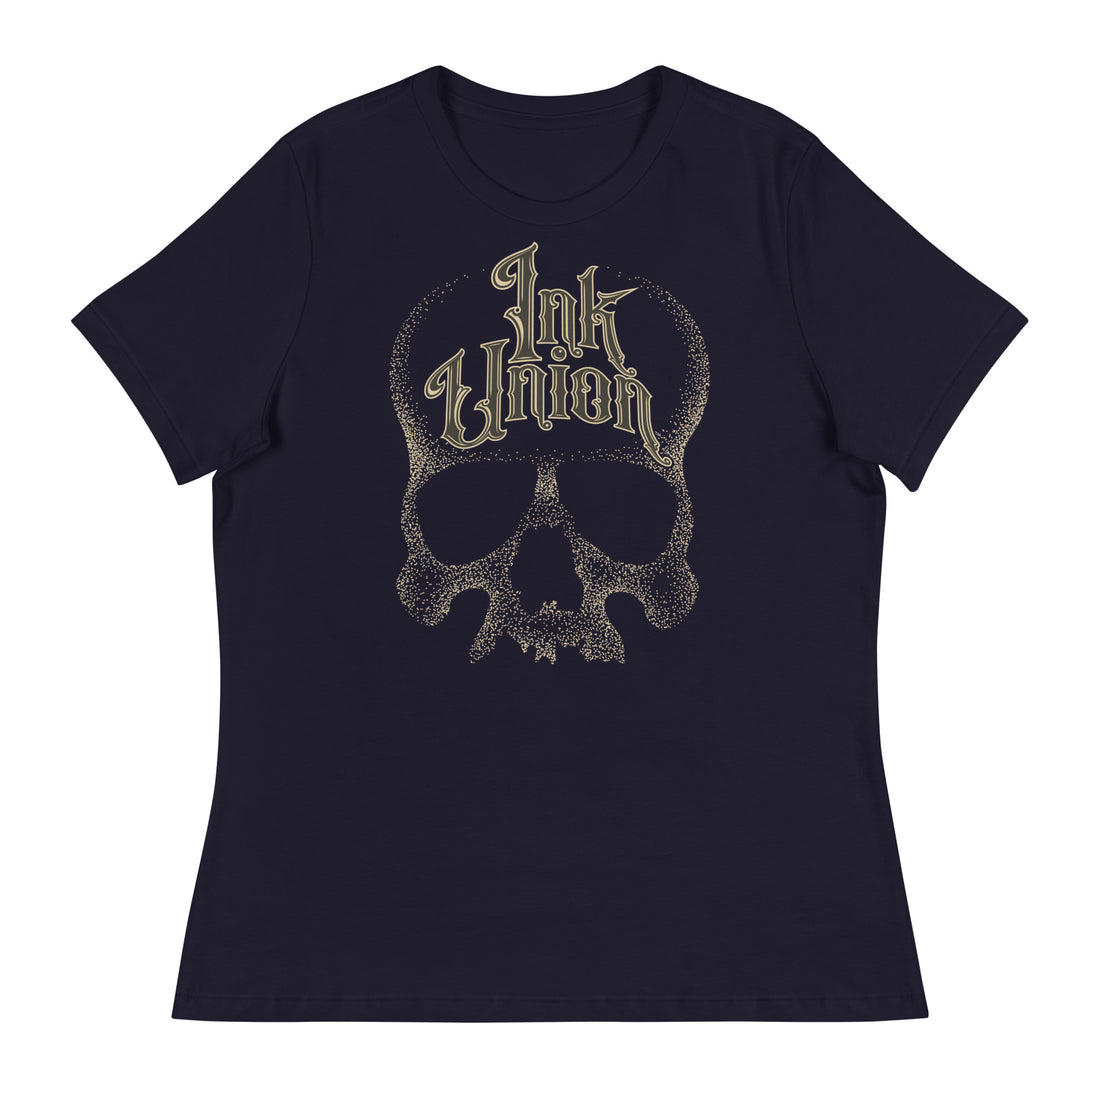 A navy blue t-shirt with a adorned with a gold dot work human skull and the words Ink Union in fancy gold and black lettering across the forehead of the skull.